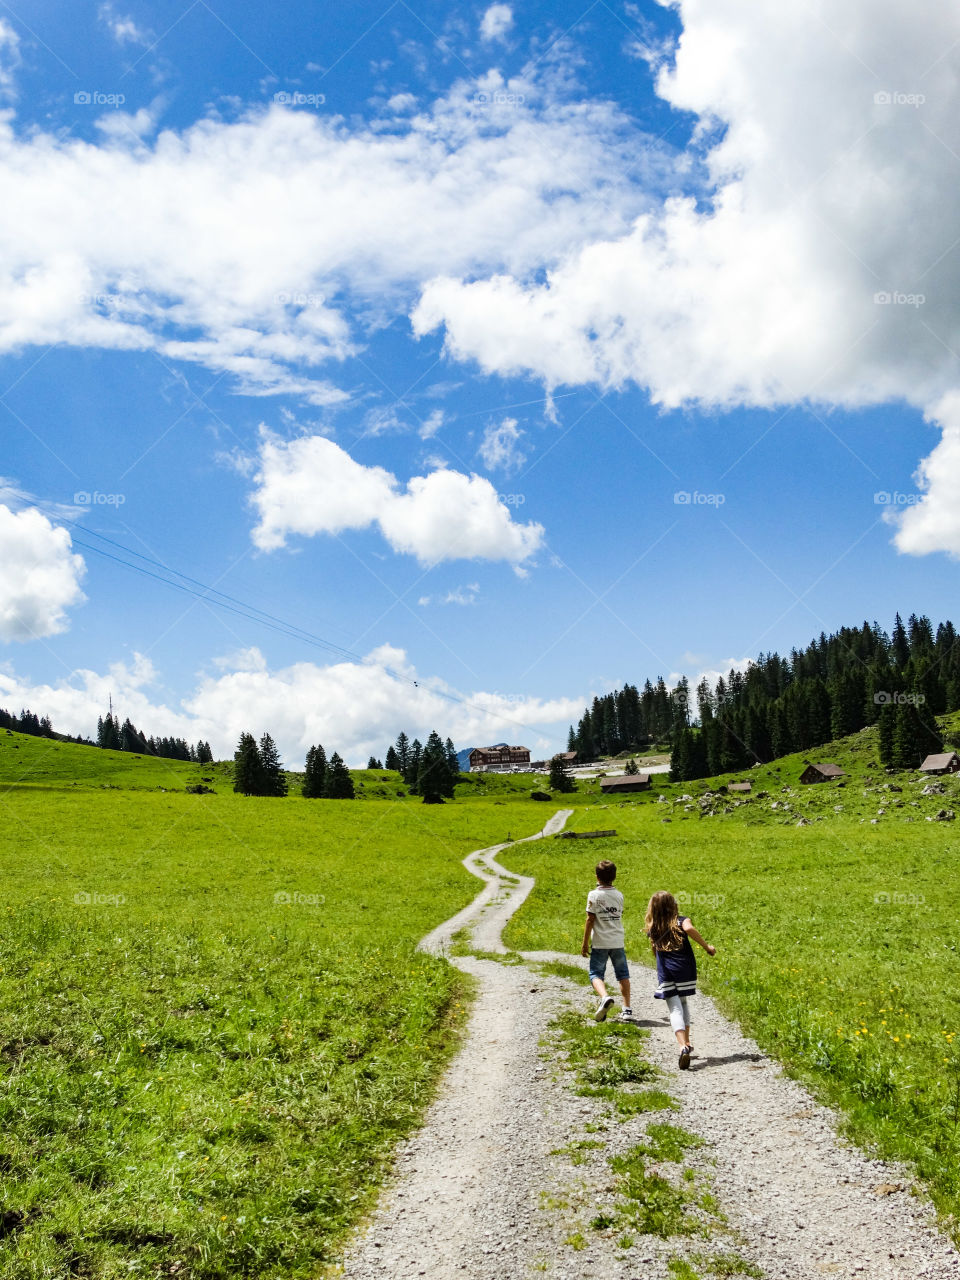 Kids playing in Switzerland, lovely nature